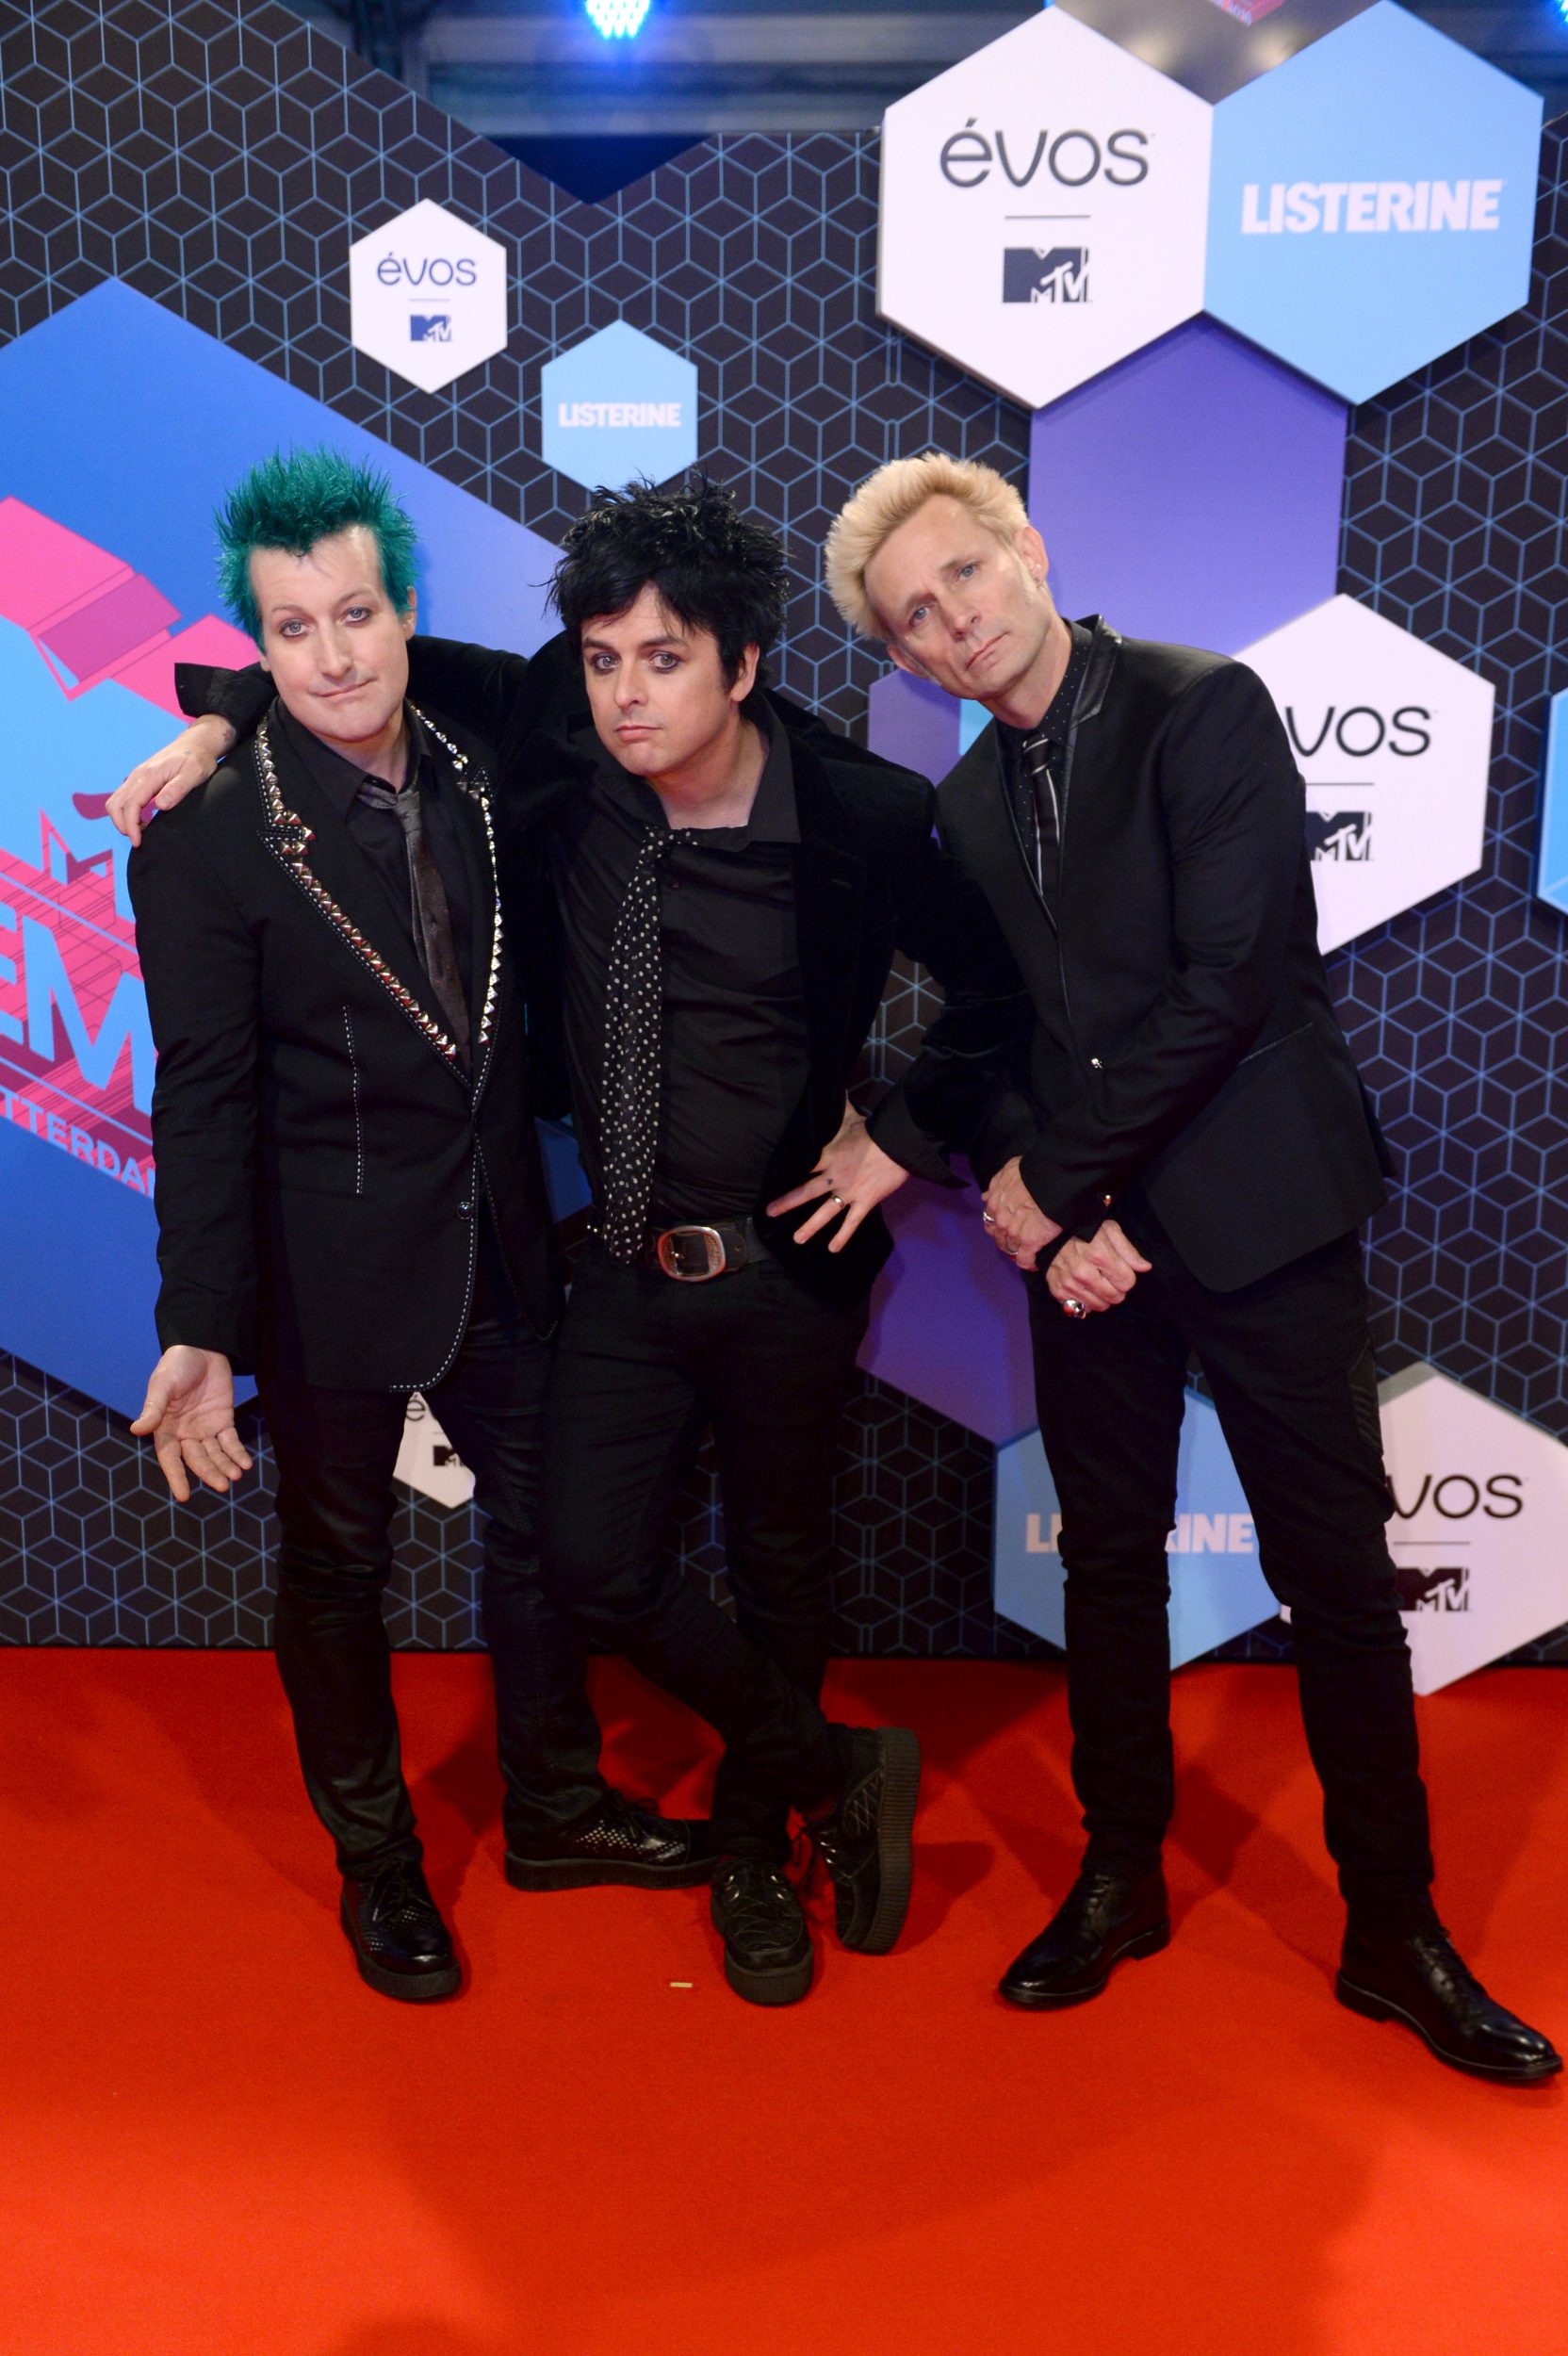 ROTTERDAM, NETHERLANDS - NOVEMBER 06: (L-R) Tre Cool, Billie Joe Armstrong and Mike Dirnt of Green Day attend the MTV Europe Music Awards 2016 on November 6, 2016 in Rotterdam, Netherlands. (Photo by Anthony Harvey/Getty Images for MTV) *** Local Caption *** Tre Cool;Billie Joe Armstrong;Mike Dirnt